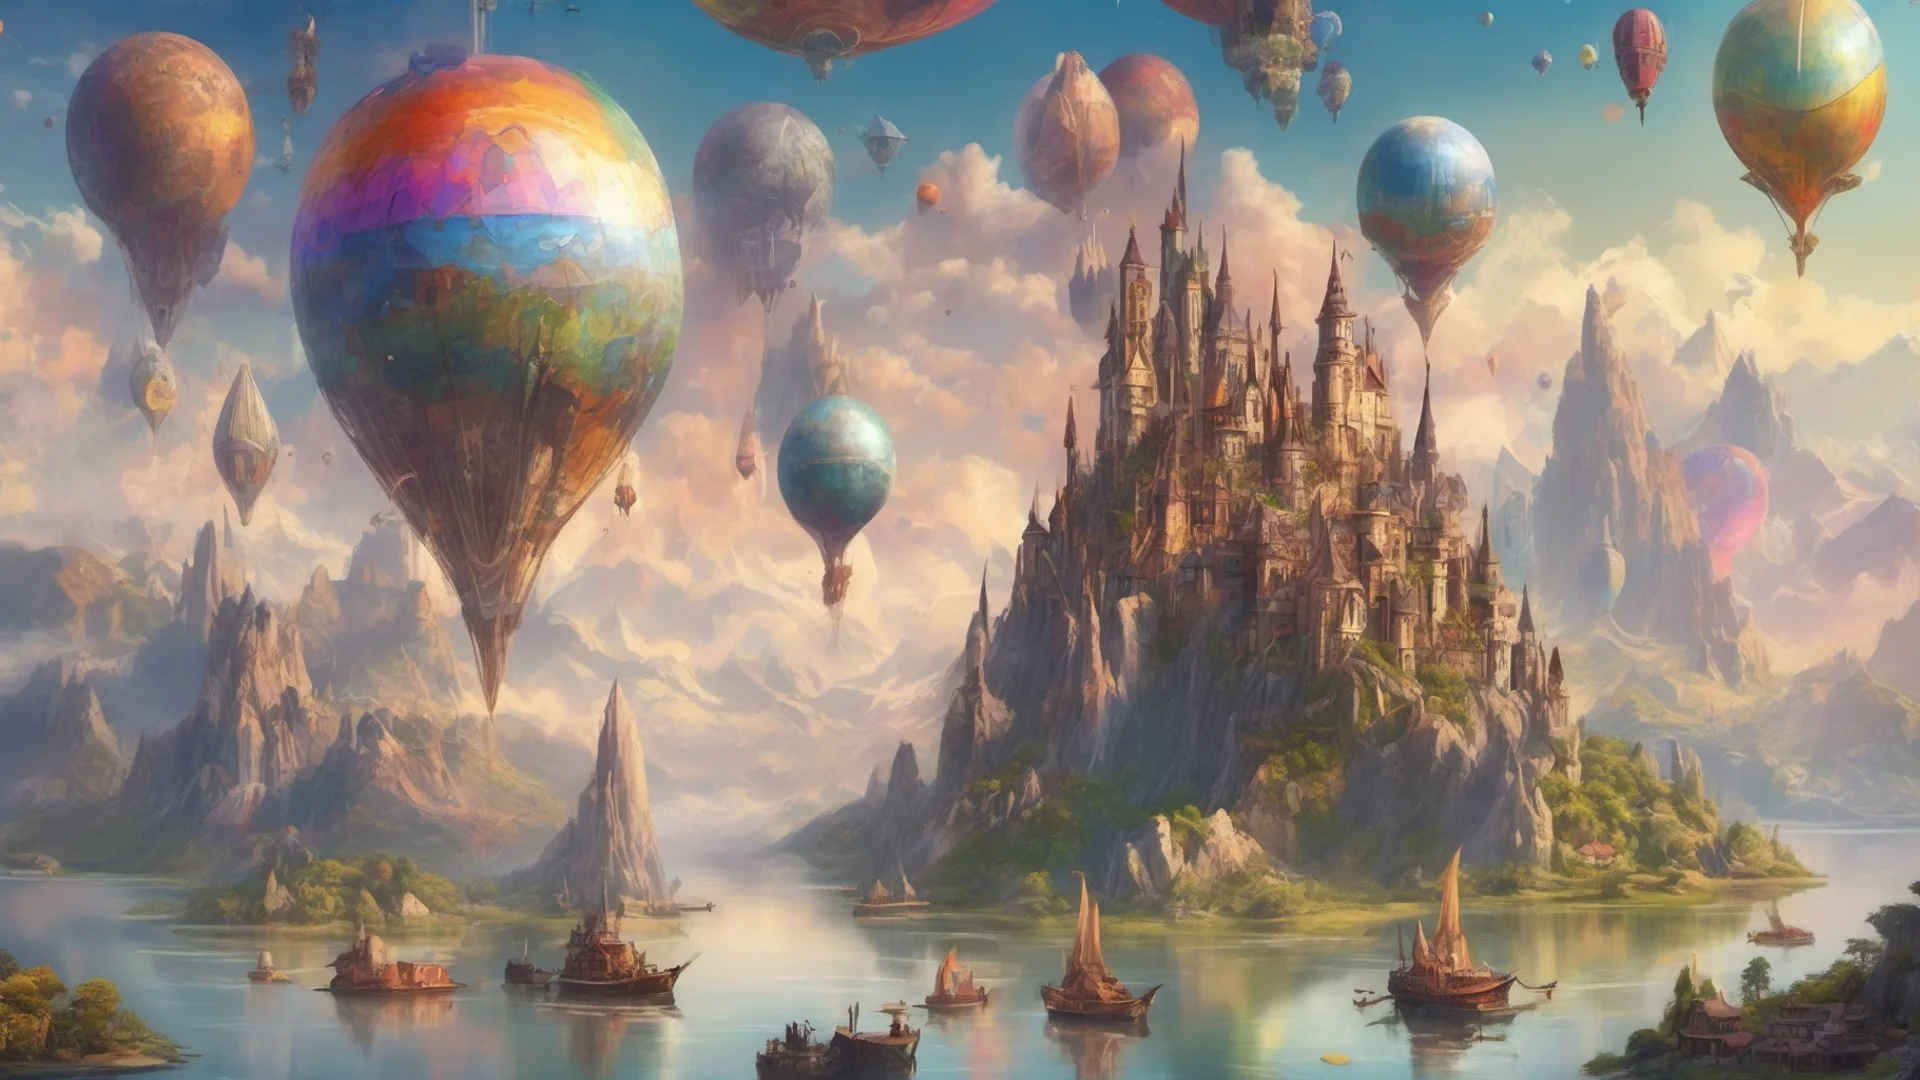 epic fantasy environment castle on tall mountain lakes sky with many colorful planets boats sailing airships and blimps floating   wide